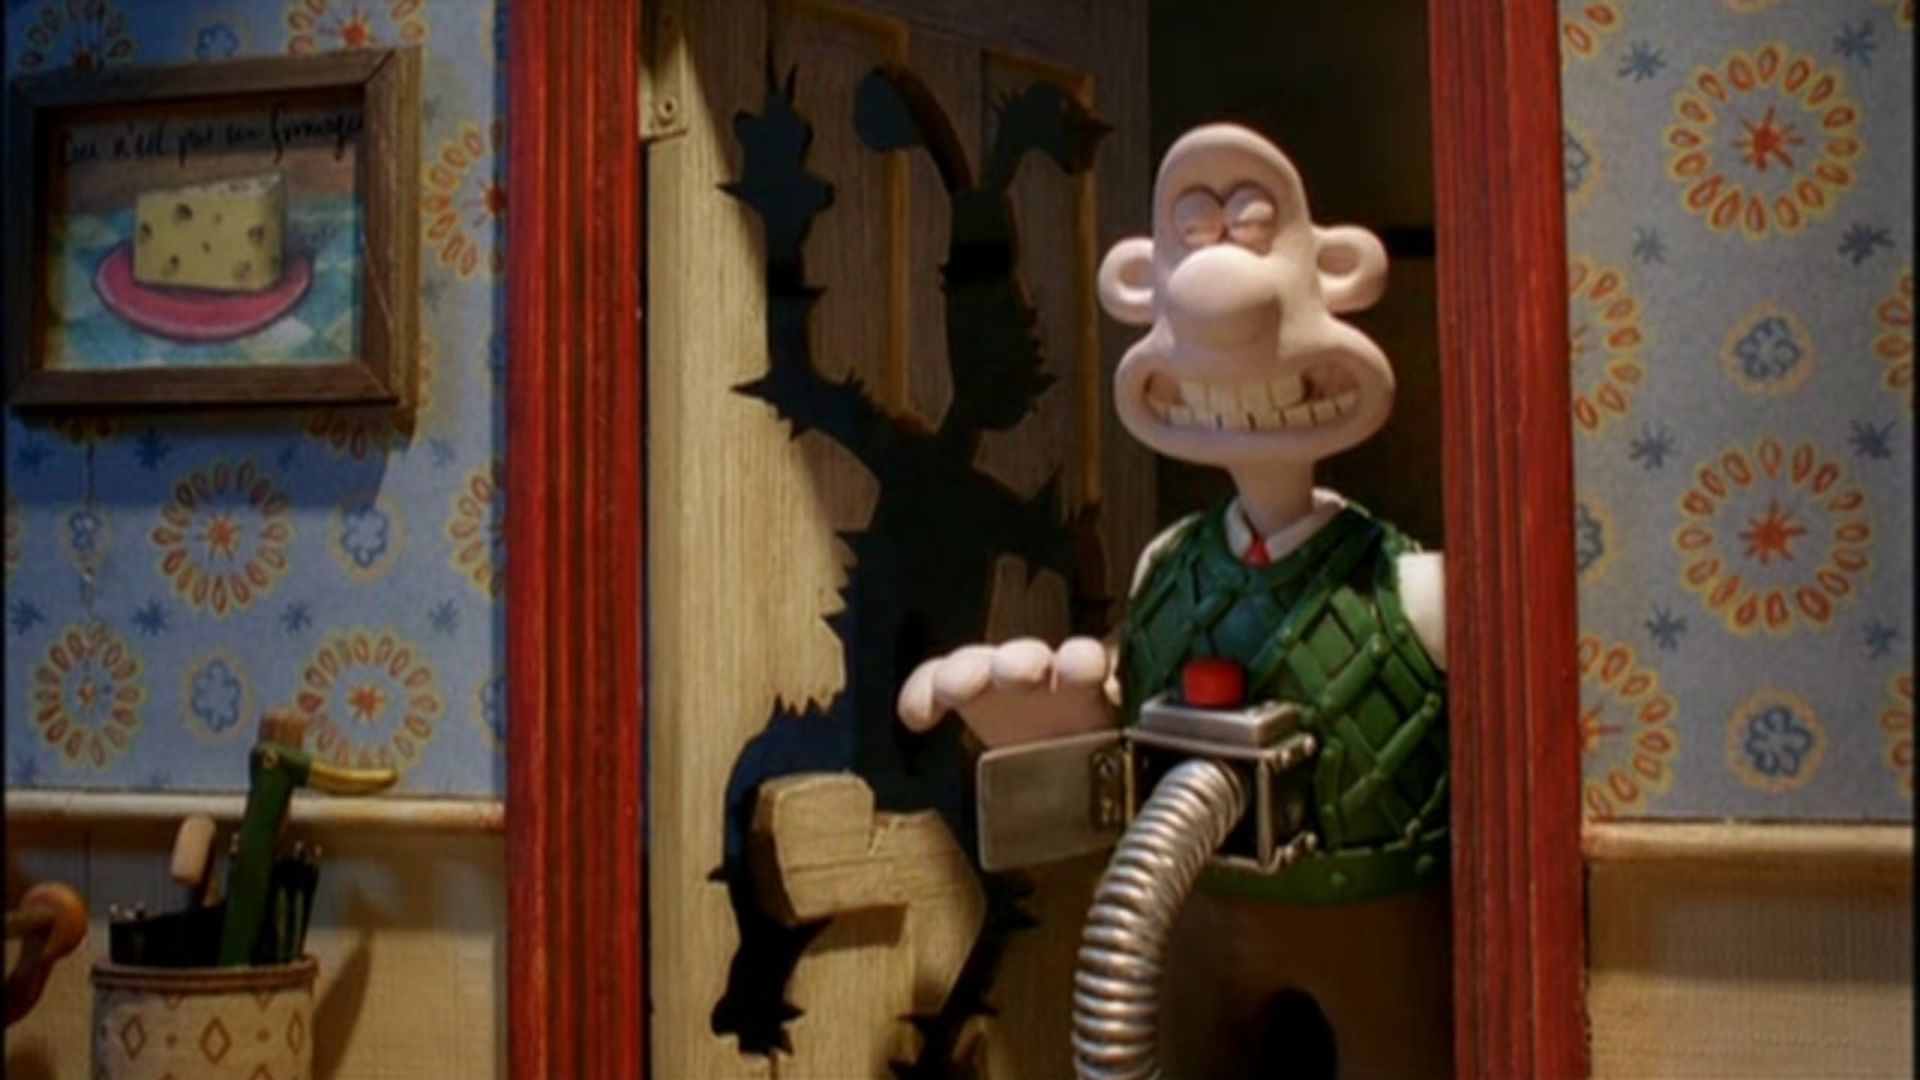 Wallace & Gromit's Cracking Contraptions background